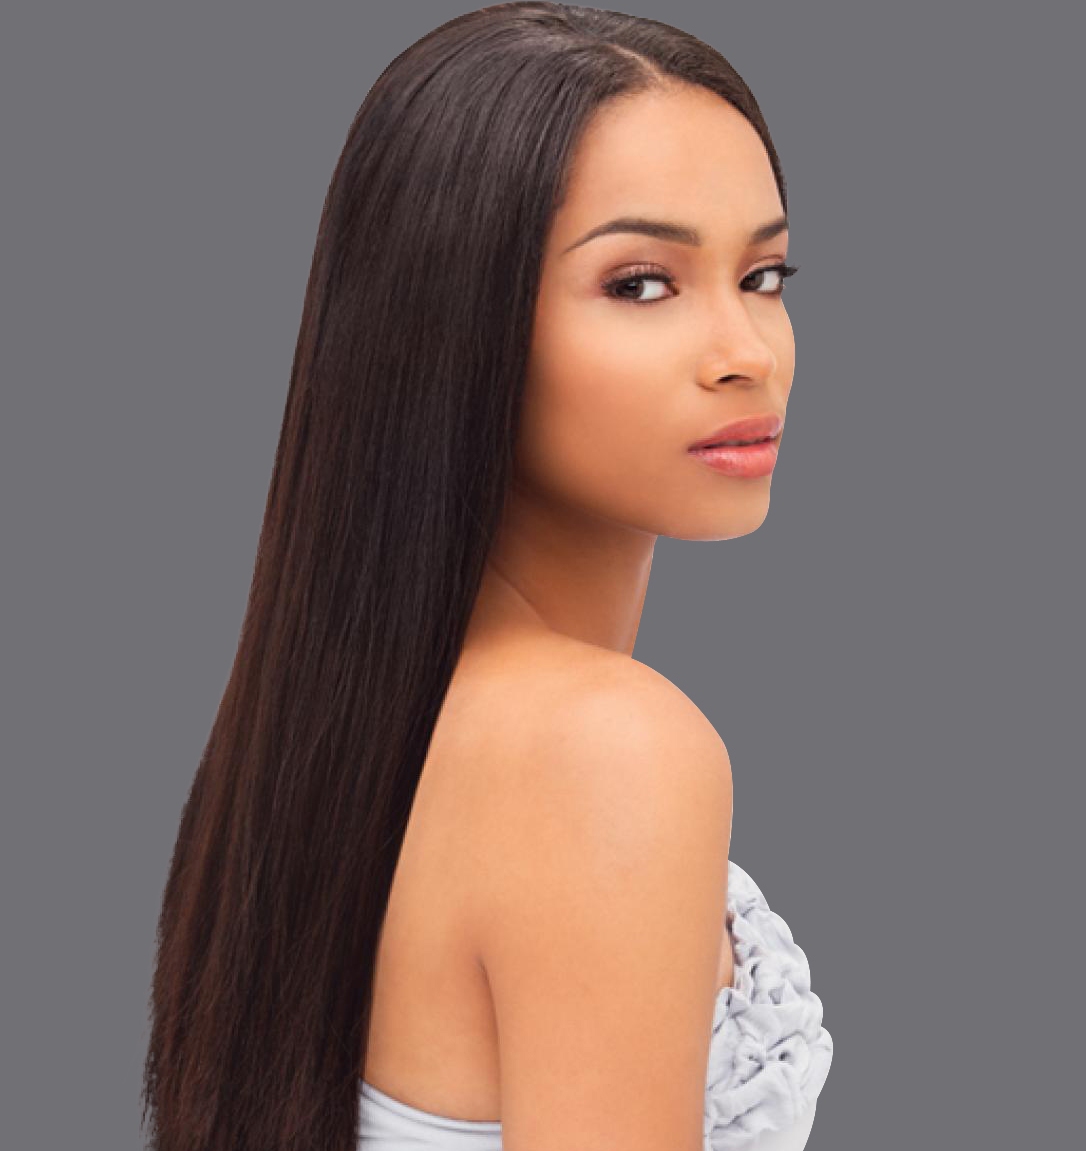 What is Weave Hair, and Will it look Nice on me? – Black Hair Spot